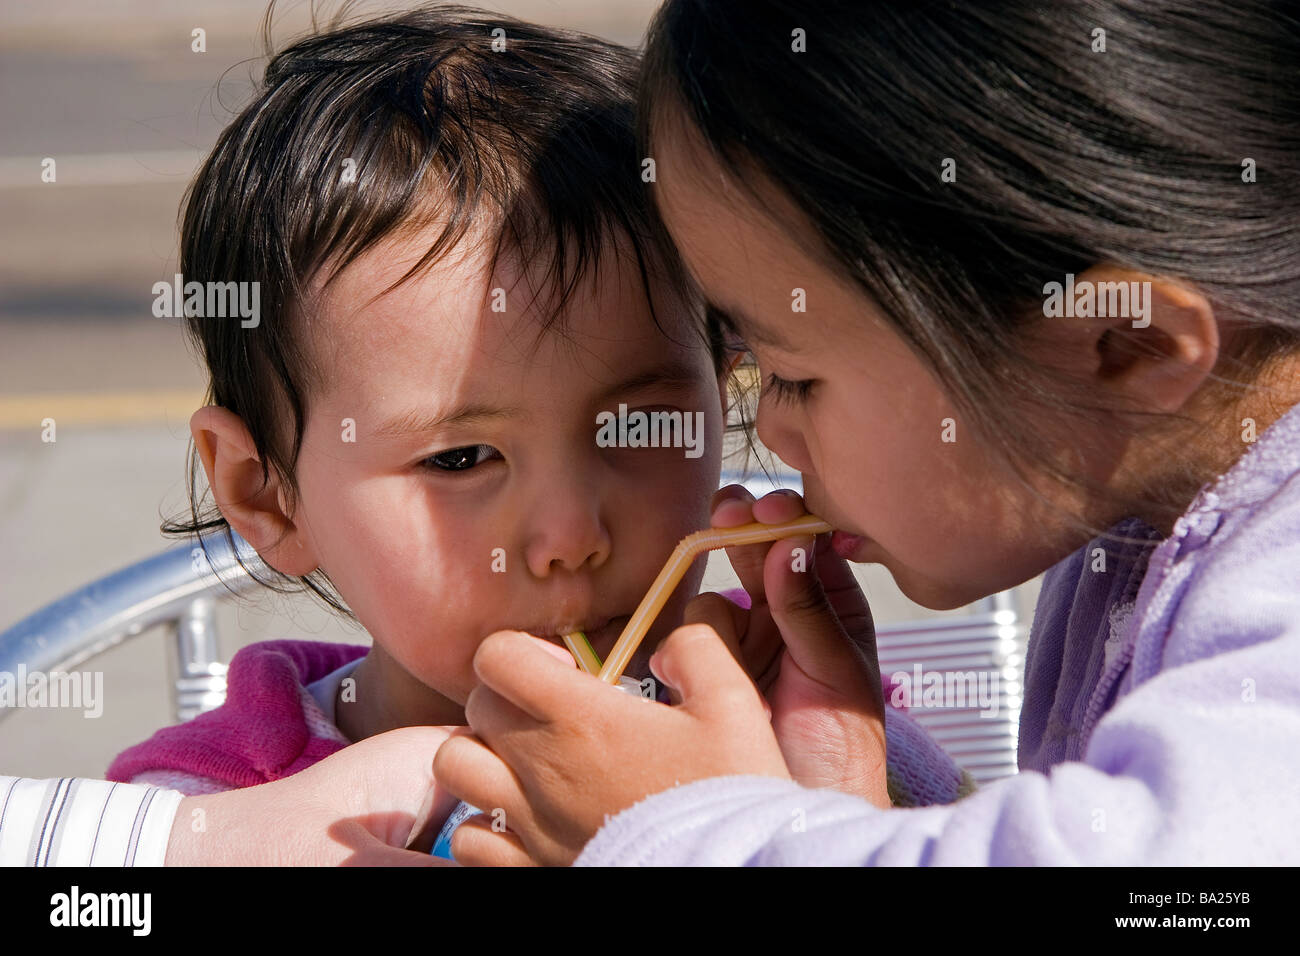 https://c8.alamy.com/comp/BA25YB/two-young-half-thai-sisters-on-their-summer-holidays-drink-from-the-BA25YB.jpg